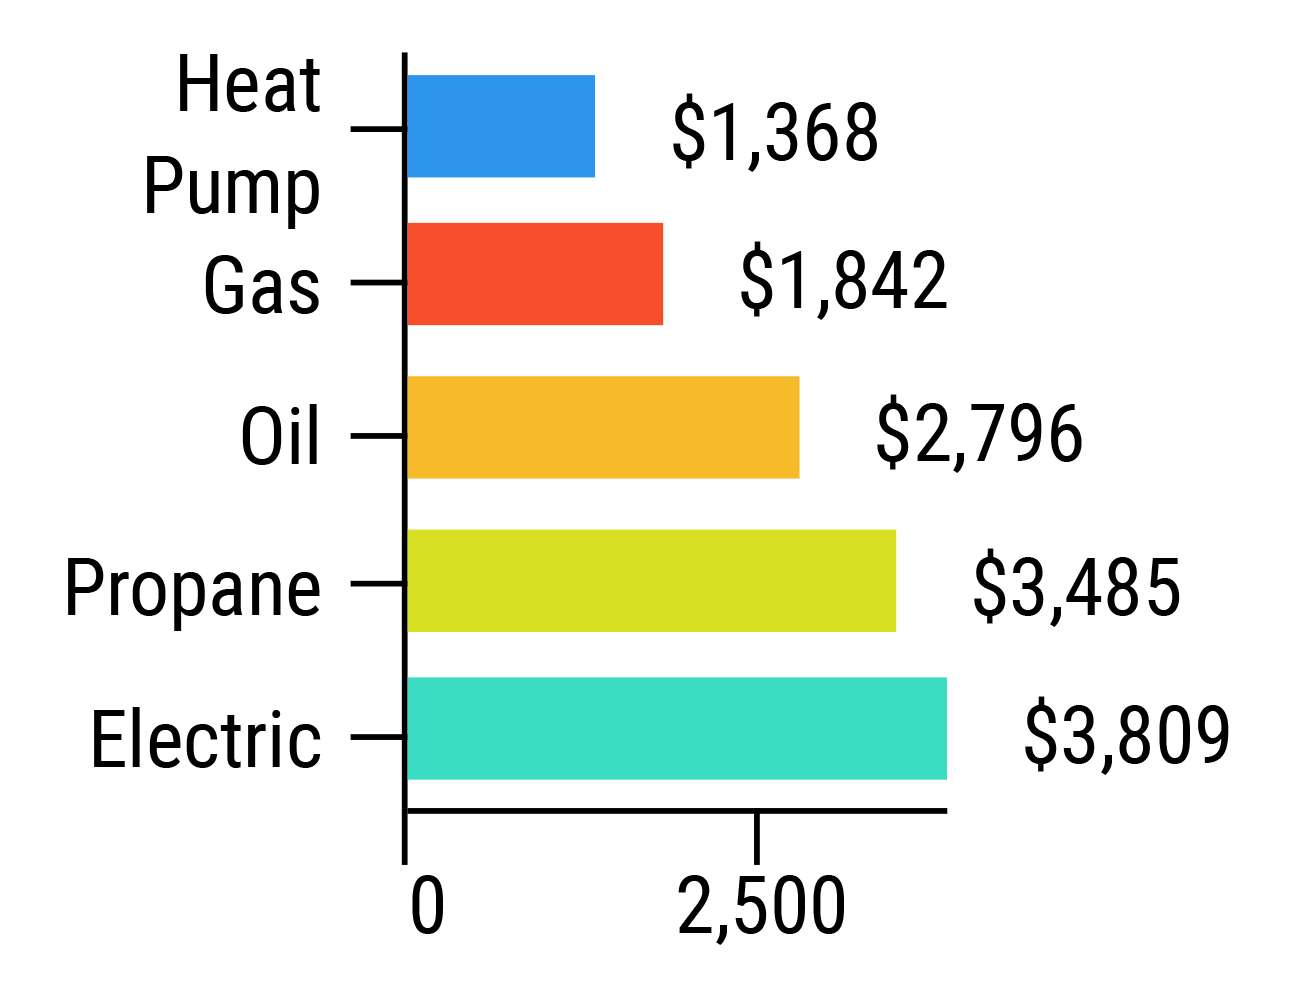 Annual Heating Costs Comparison graphic